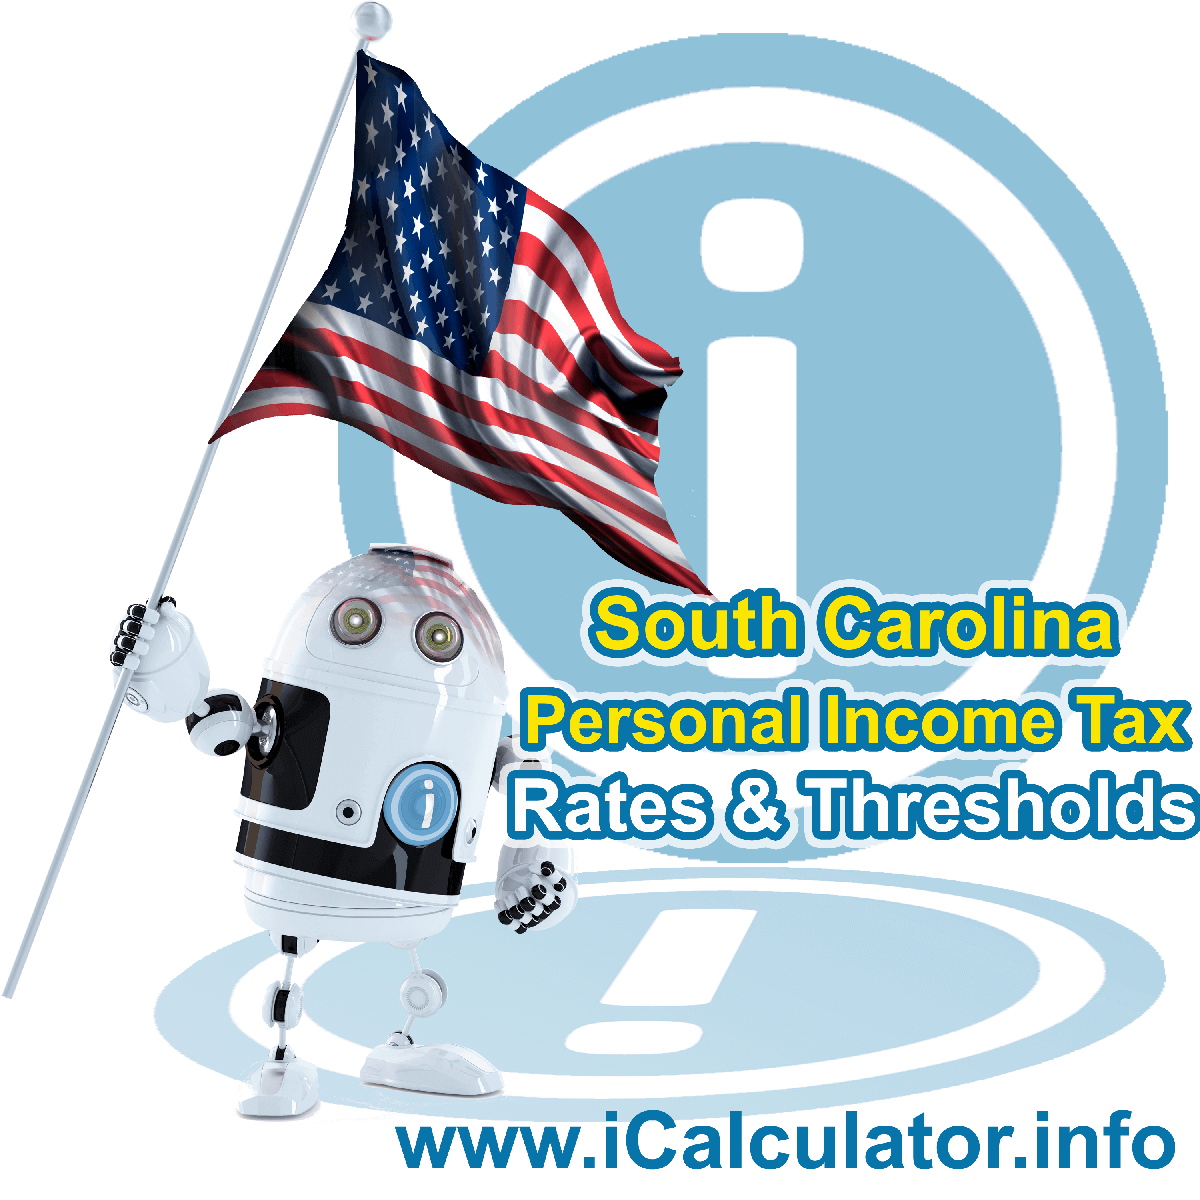 South Carolina State Tax Tables 2019. This image displays details of the South Carolina State Tax Tables for the 2019 tax return year which is provided in support of the 2019 US Tax Calculator